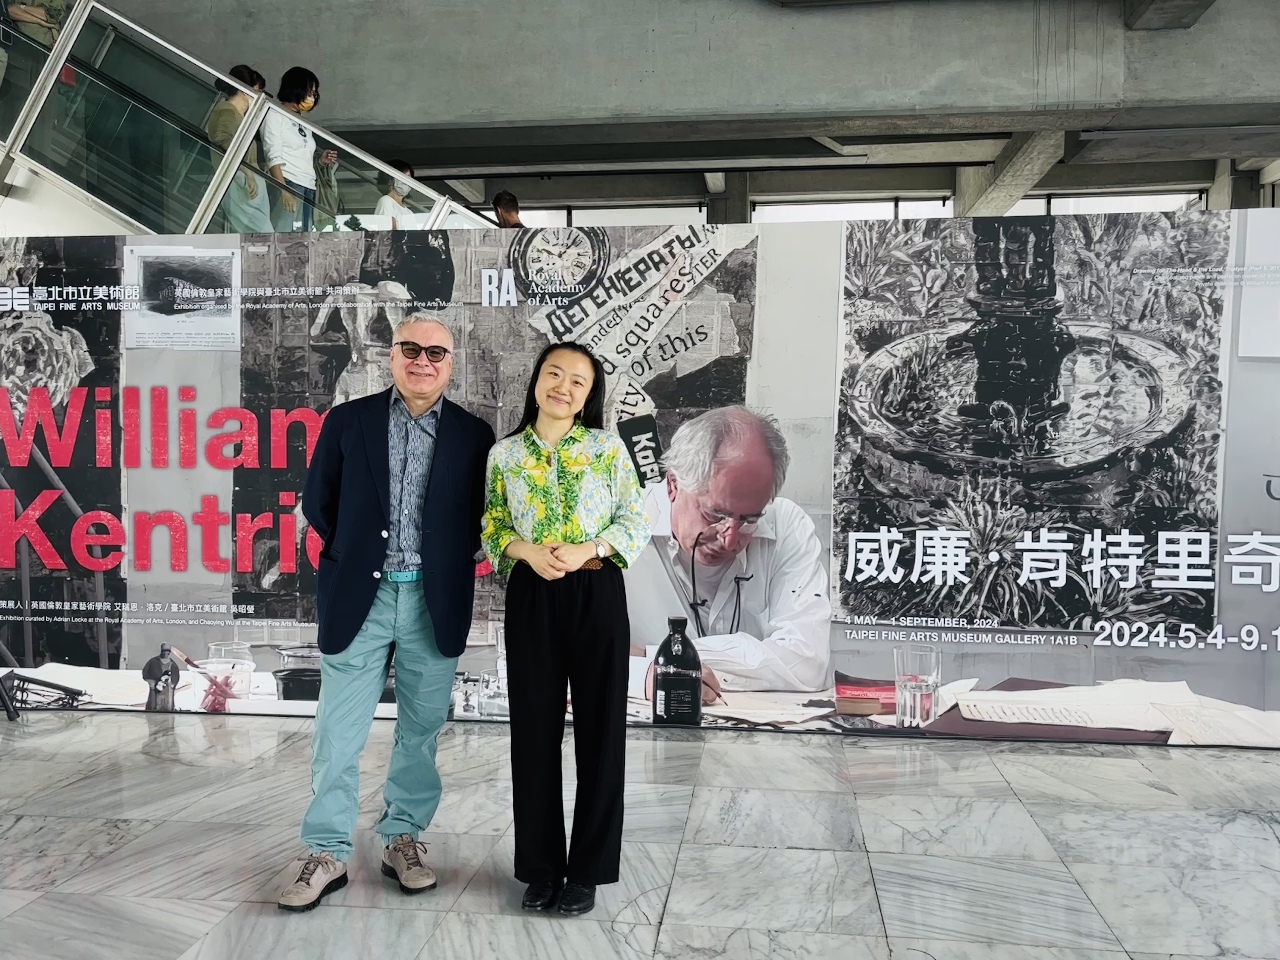 William Kentridge - first-ever exhibition in Taiwan is on! ft. Adrian Locke